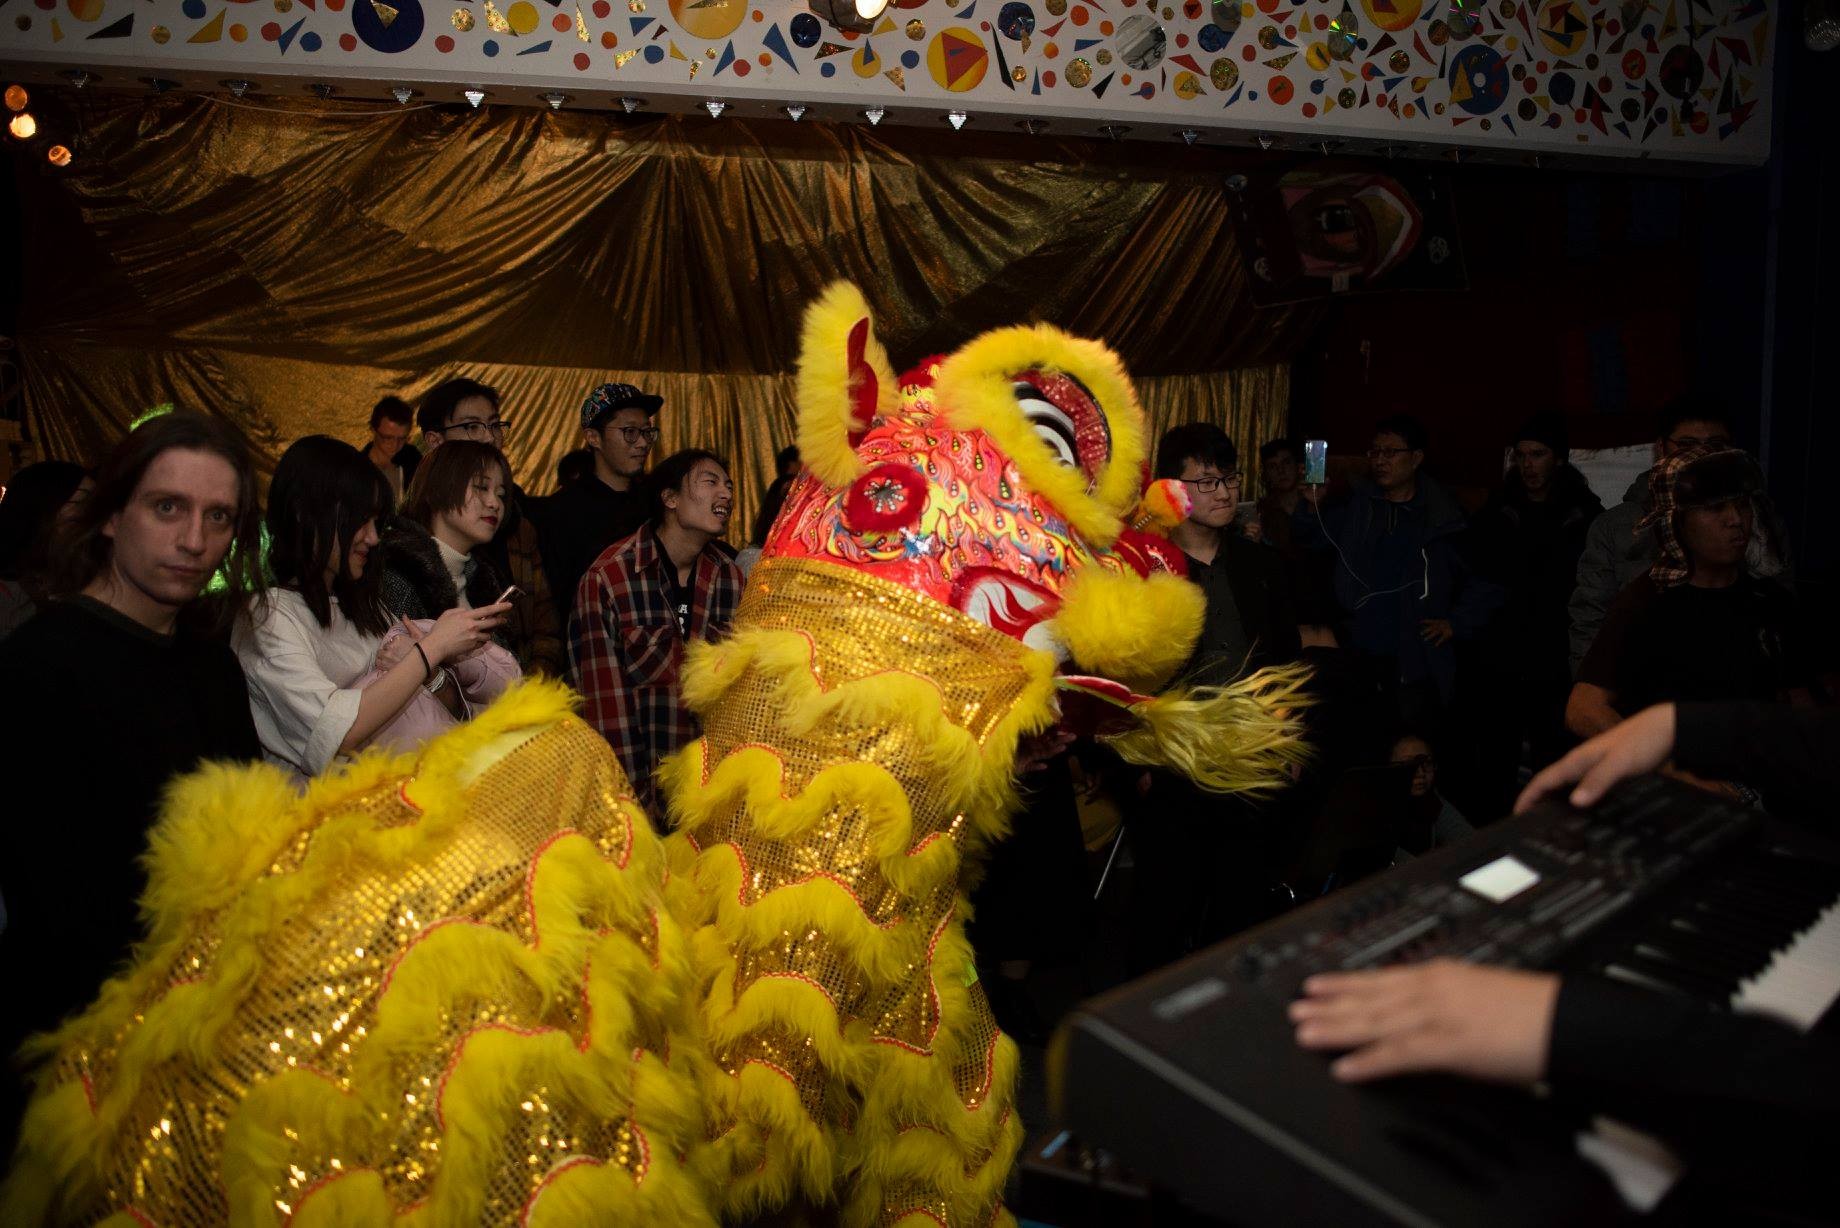 Lion dance performance in a busy crowded room packed with audiences and band playing on the side